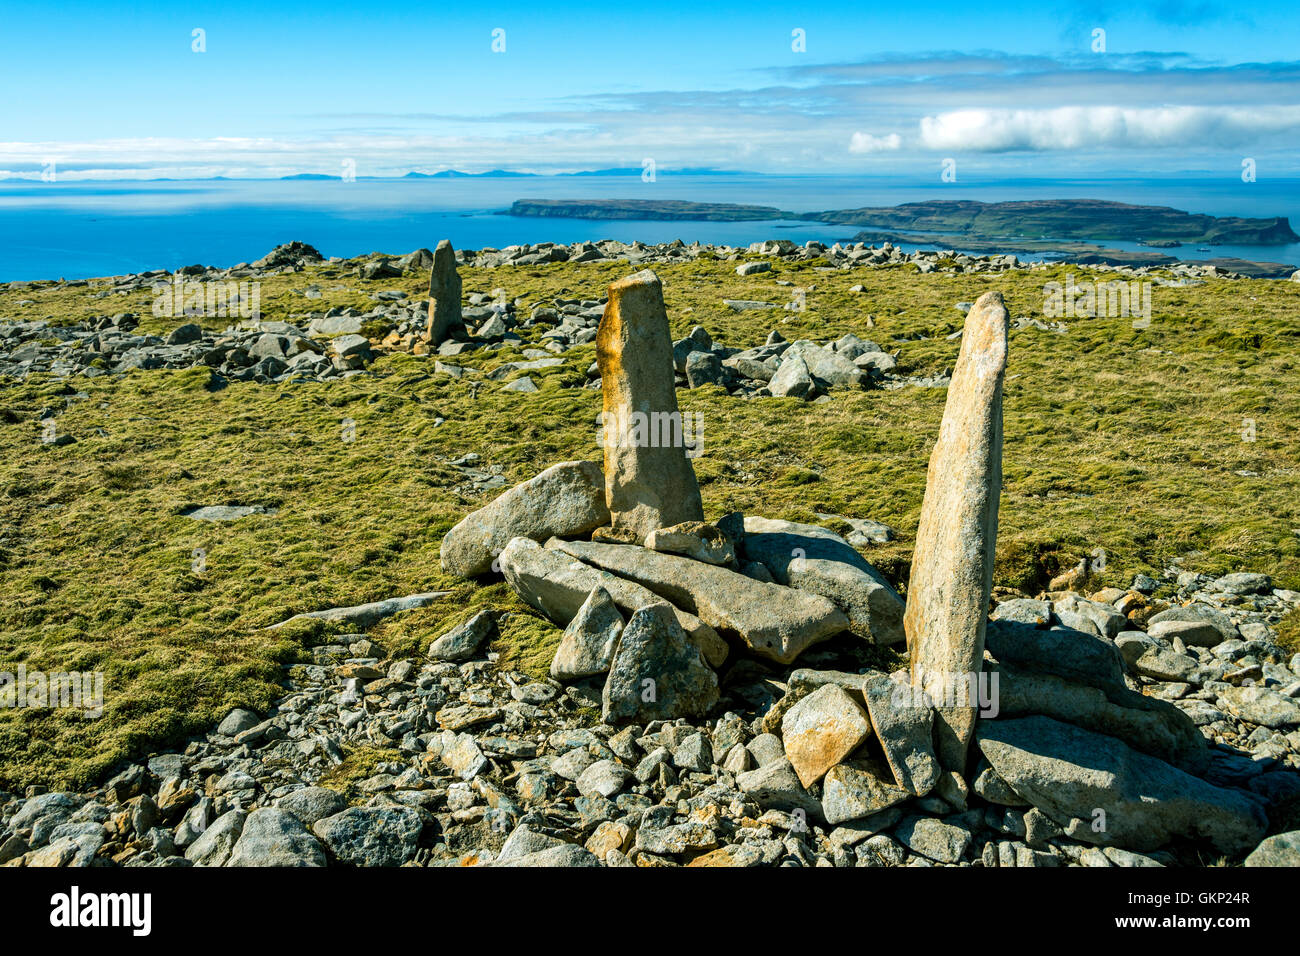 The island of Canna and the Western Isles from near the summit of Sròn an t-Saighdeir, Isle of Rum, Scotland, UK Stock Photo